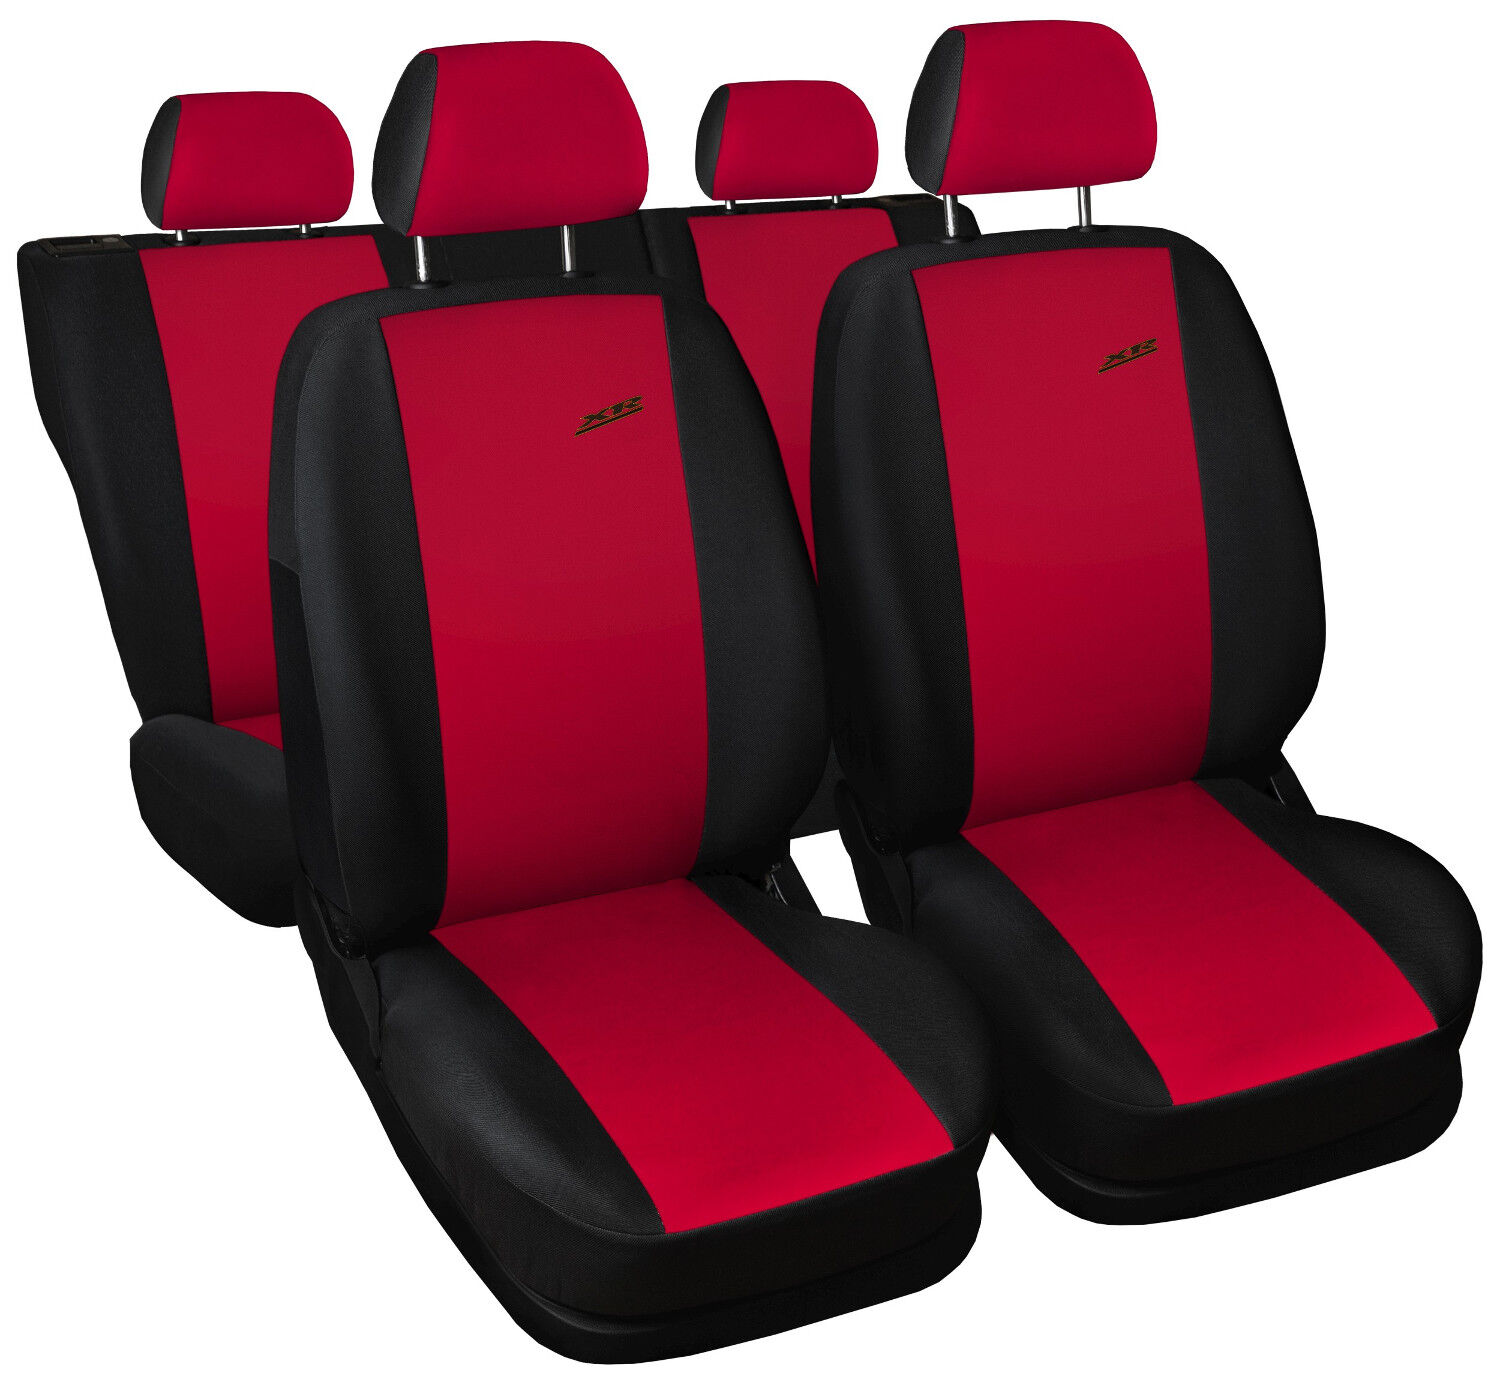  CAR SEAT COVERS fit Seat Ibiza - XR black/red sport style full set